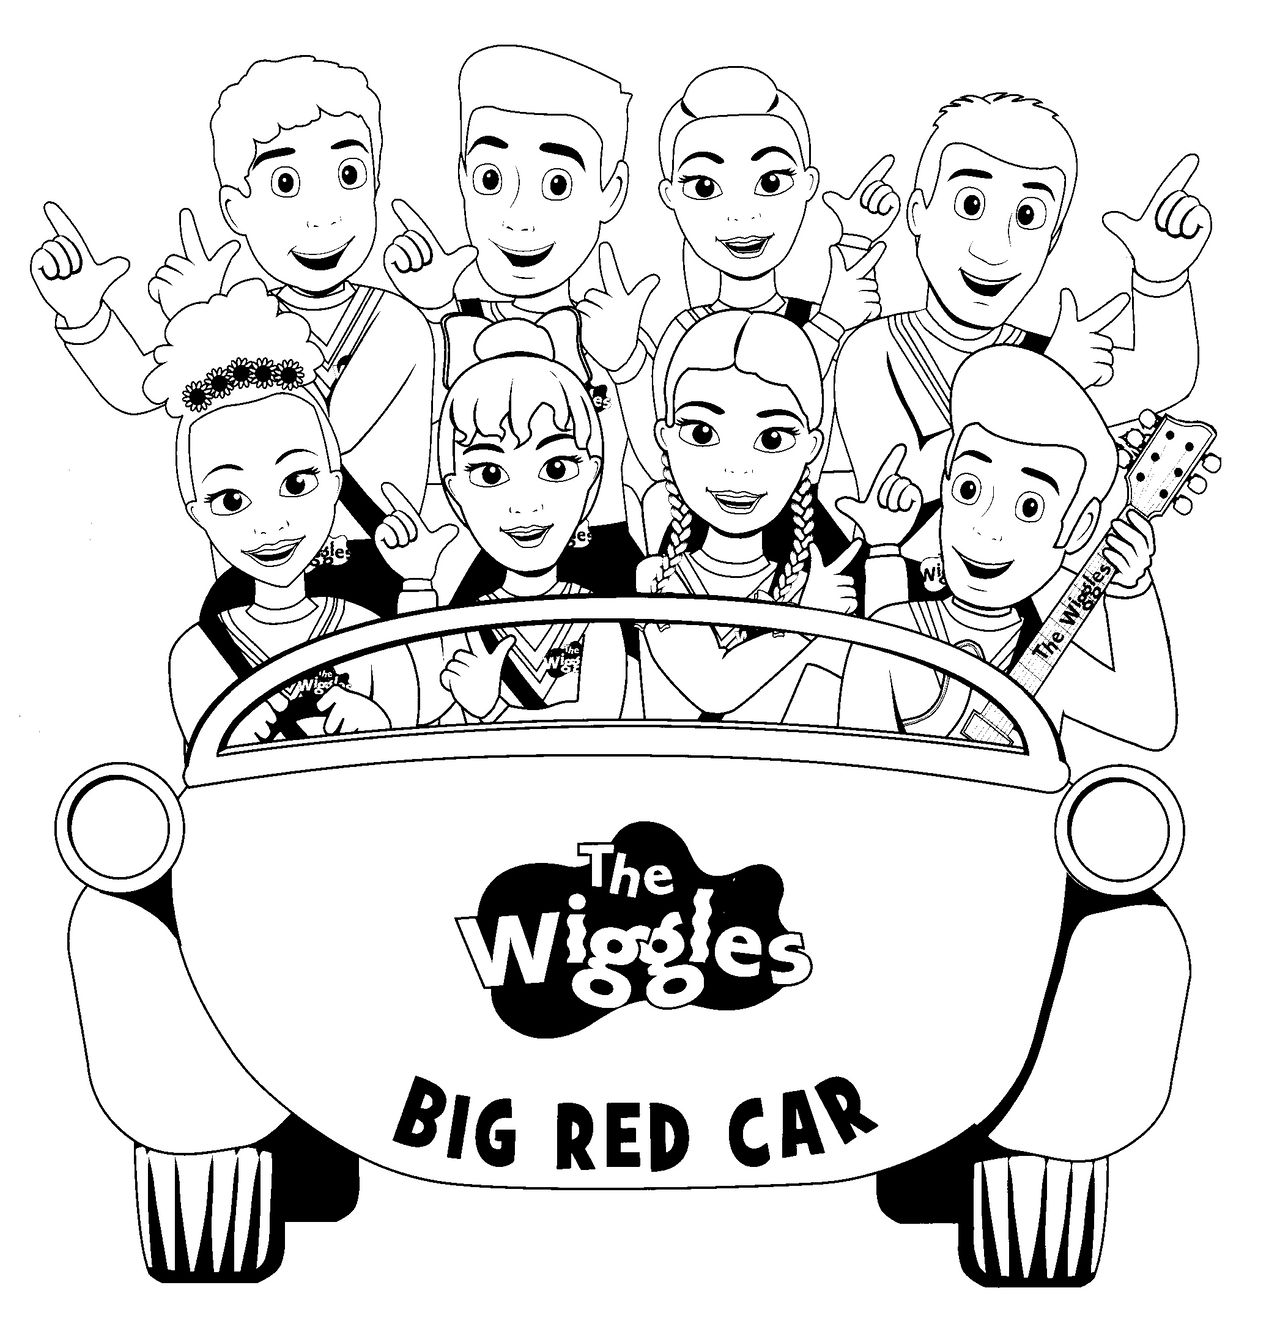 The Wiggles Colour In Big Red Car By Trevorhines On Deviantart